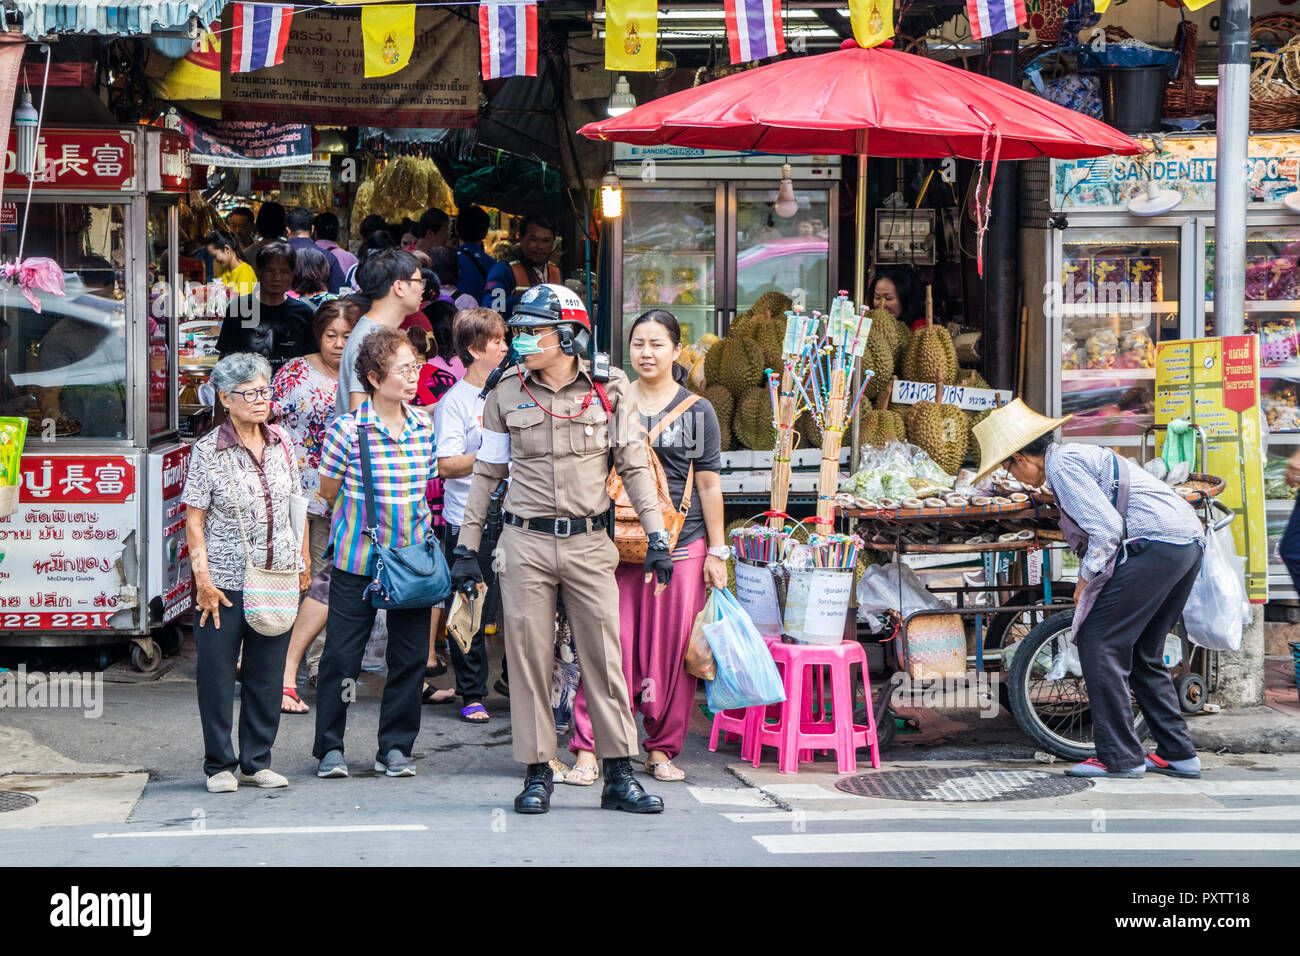 Bangkok, Thailand - 25th September 2018: A policeman controls traffic at a zebra crossing. Yaowarat road is the main thoroughfare in Chinatown. Stock Photo